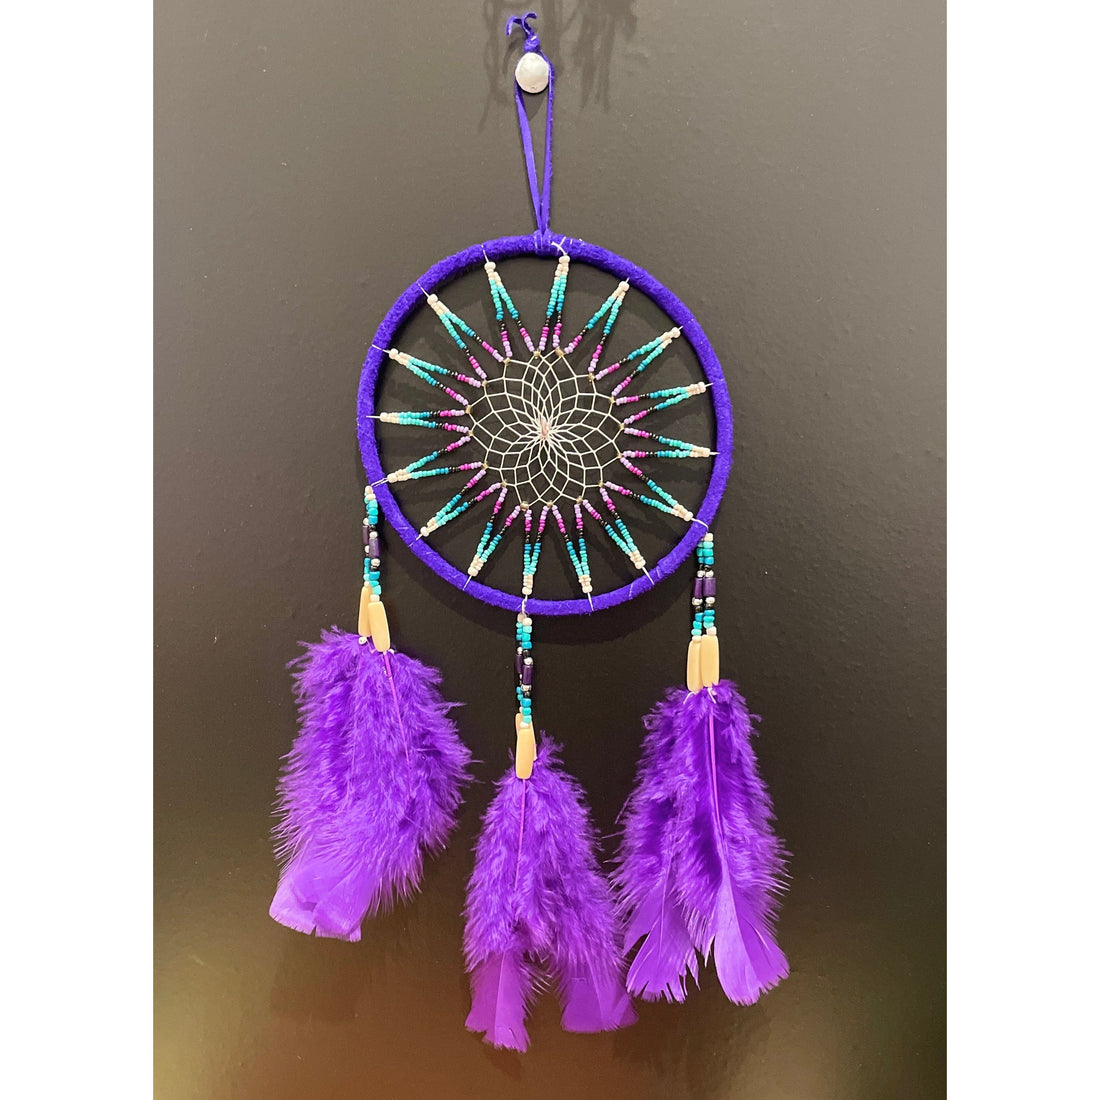 The Dream Catchers extra large